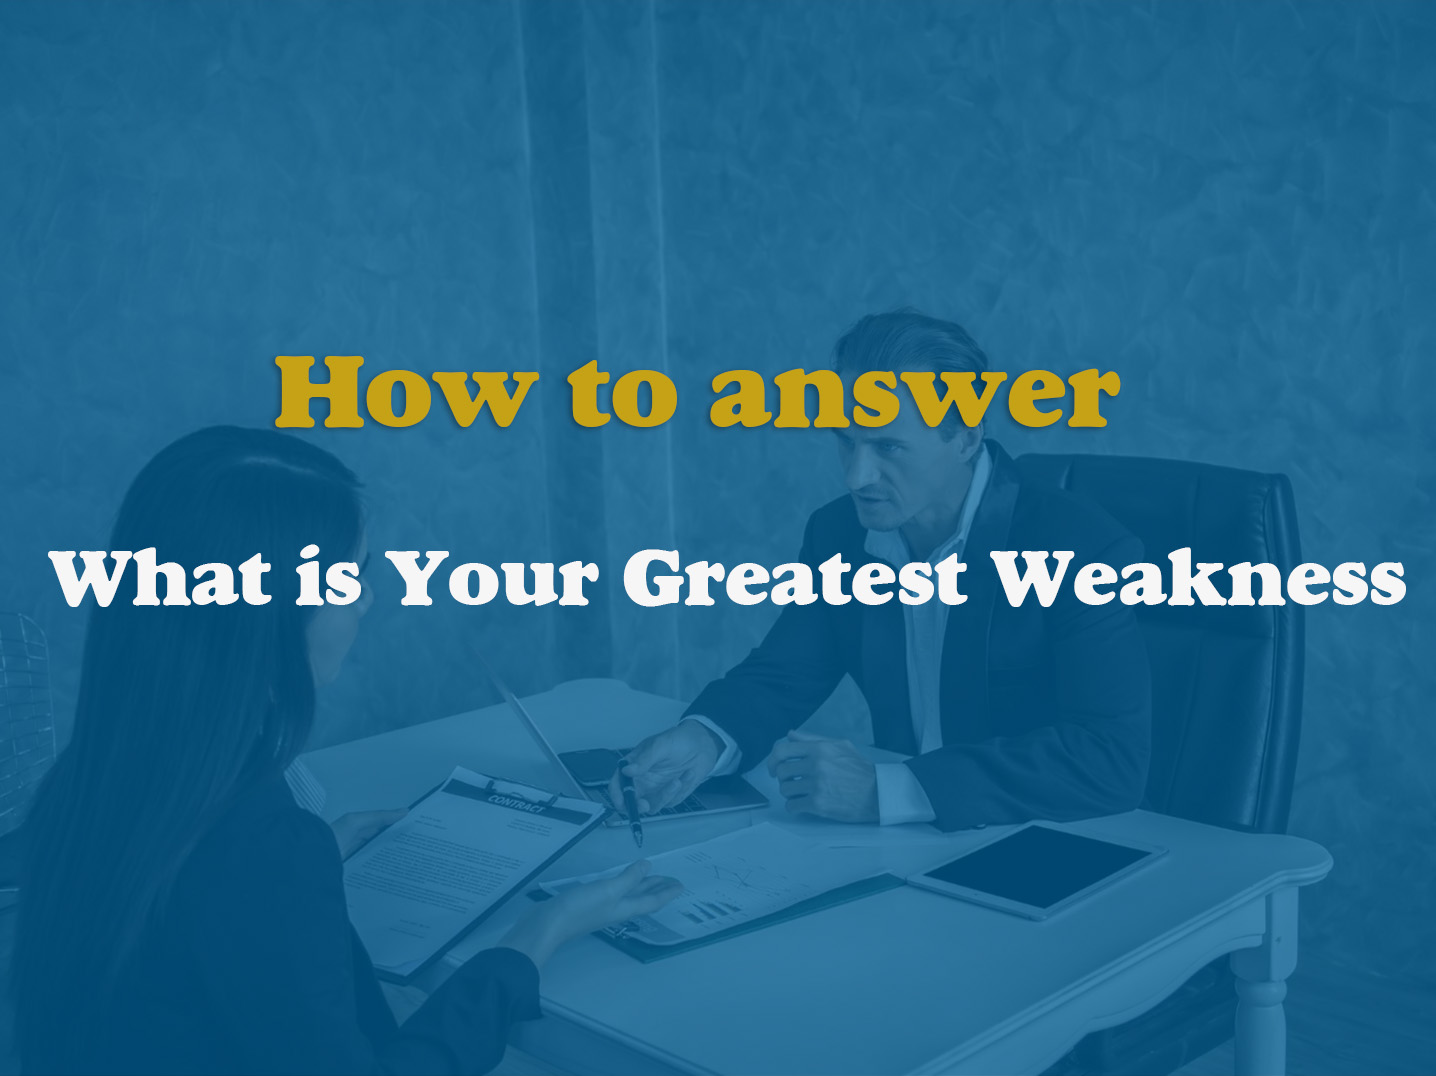 How to answer “What is Your Greatest Weakness” in a job interview?